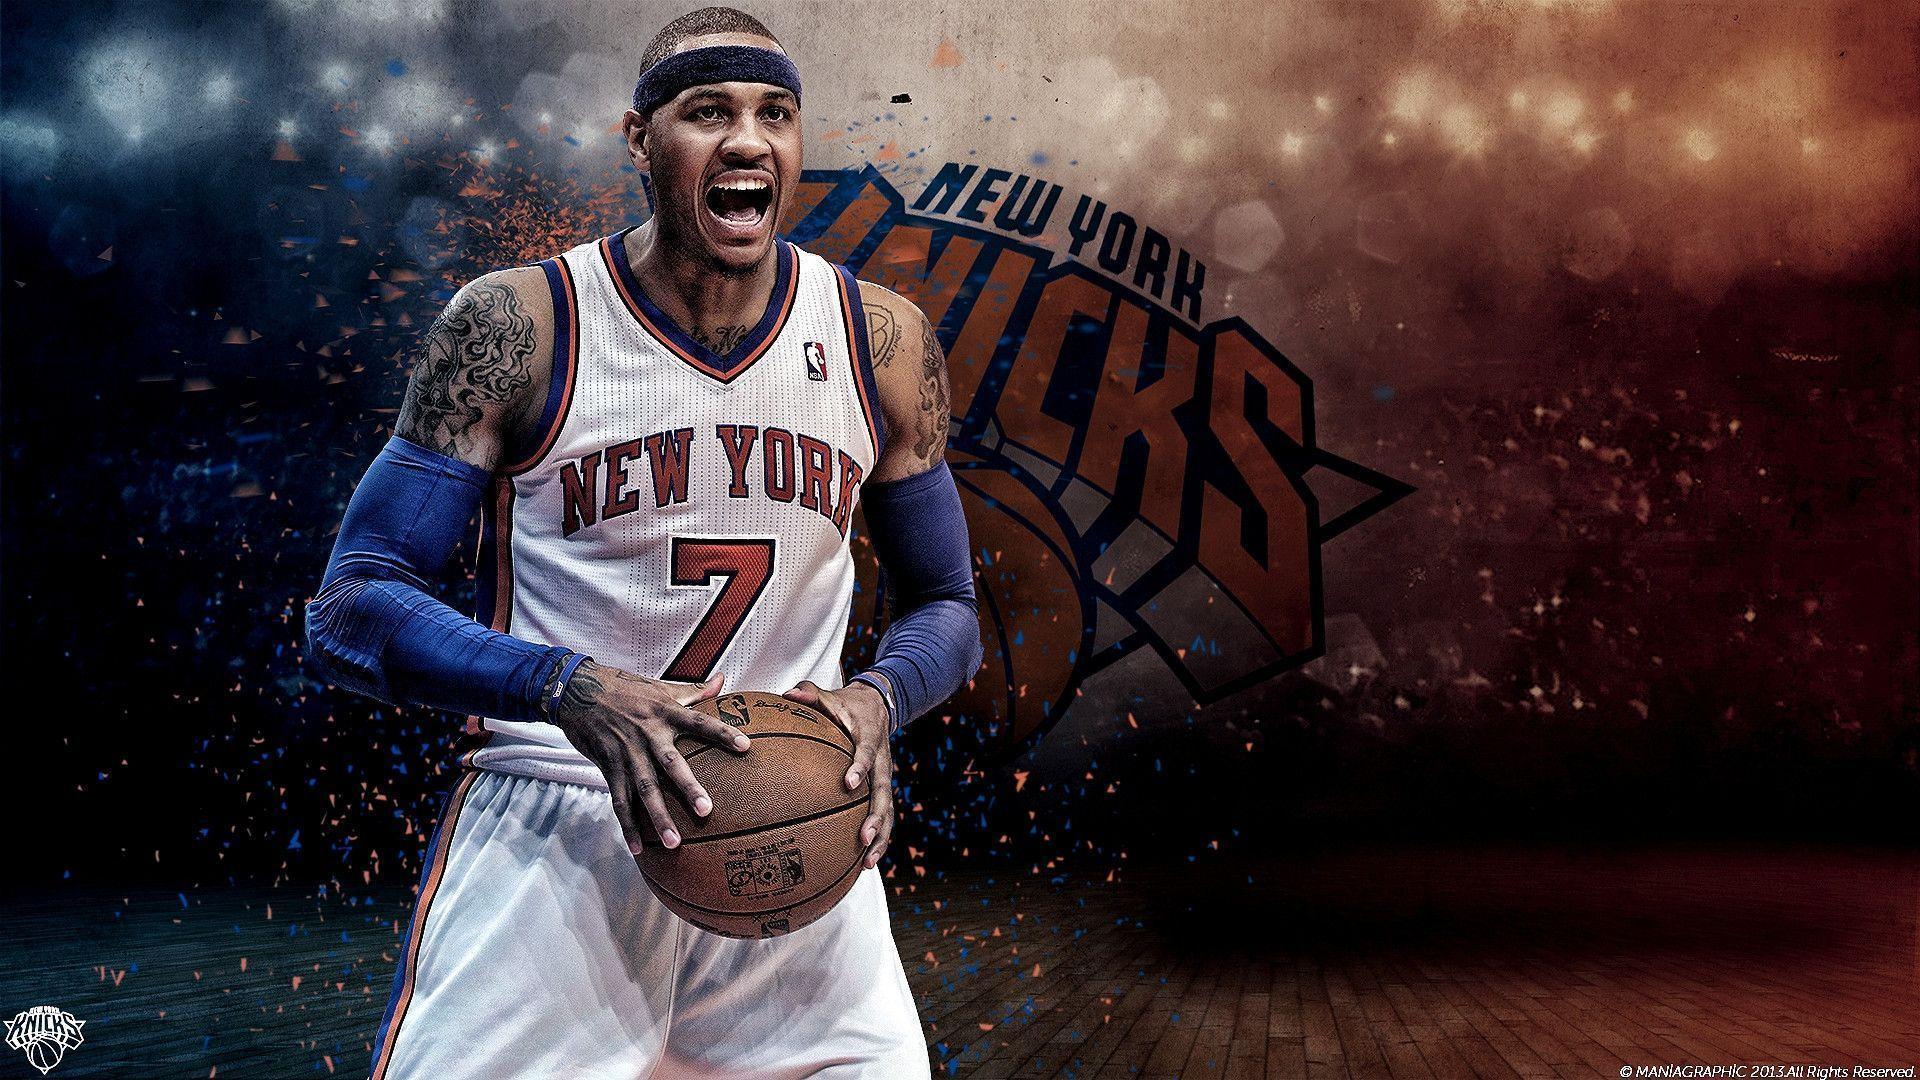 Carmelo Anthony Wallpaper High Resolution and Quality Download